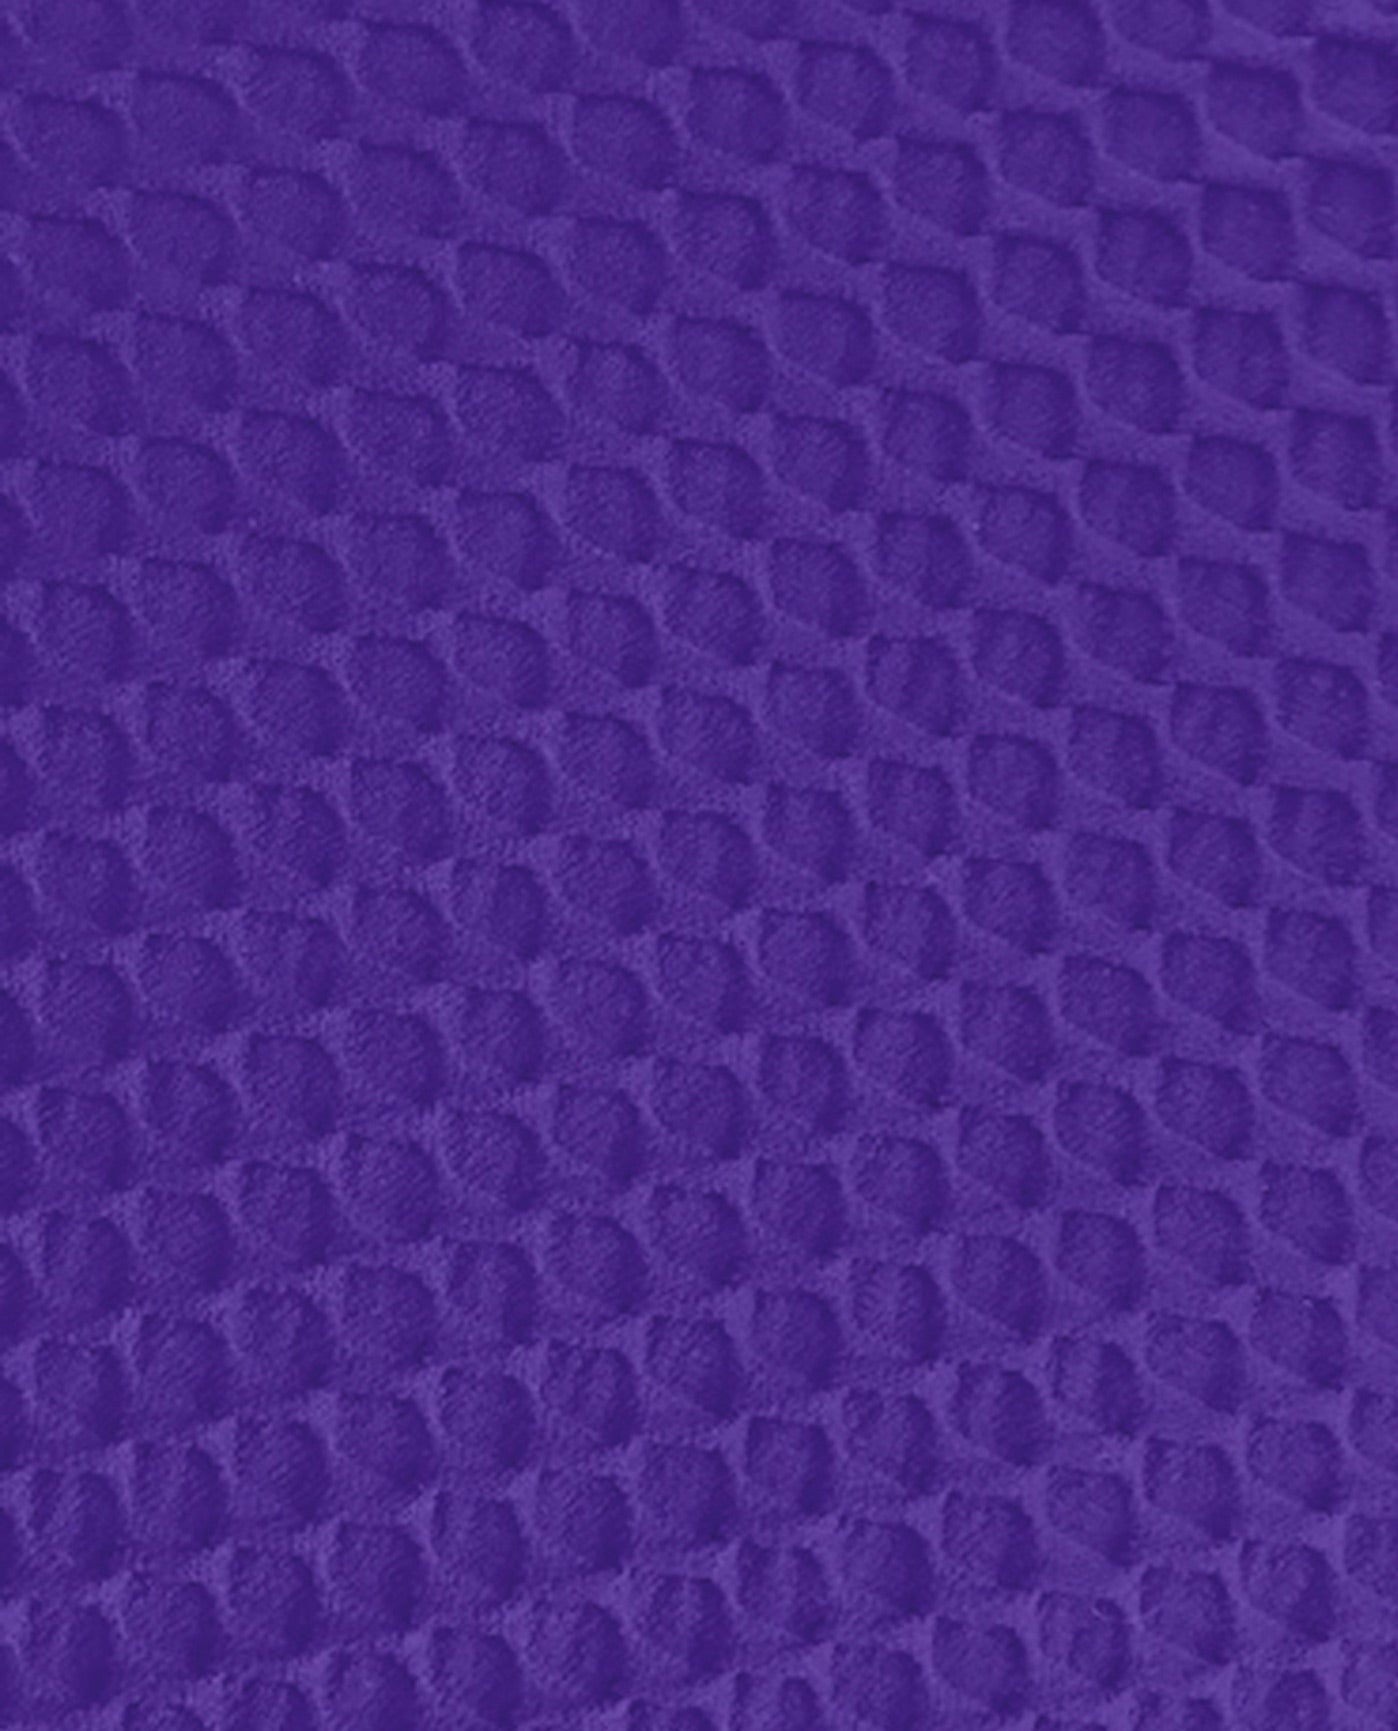 FABRIC SWATCH VIEW OF CHLORINE RESISTANT AQUAMORE COLOR BLOCK TEXTURED TWIST FRONT ONE PIECE SWIMSUIT | 618 AQT TEXTURED PURPLE